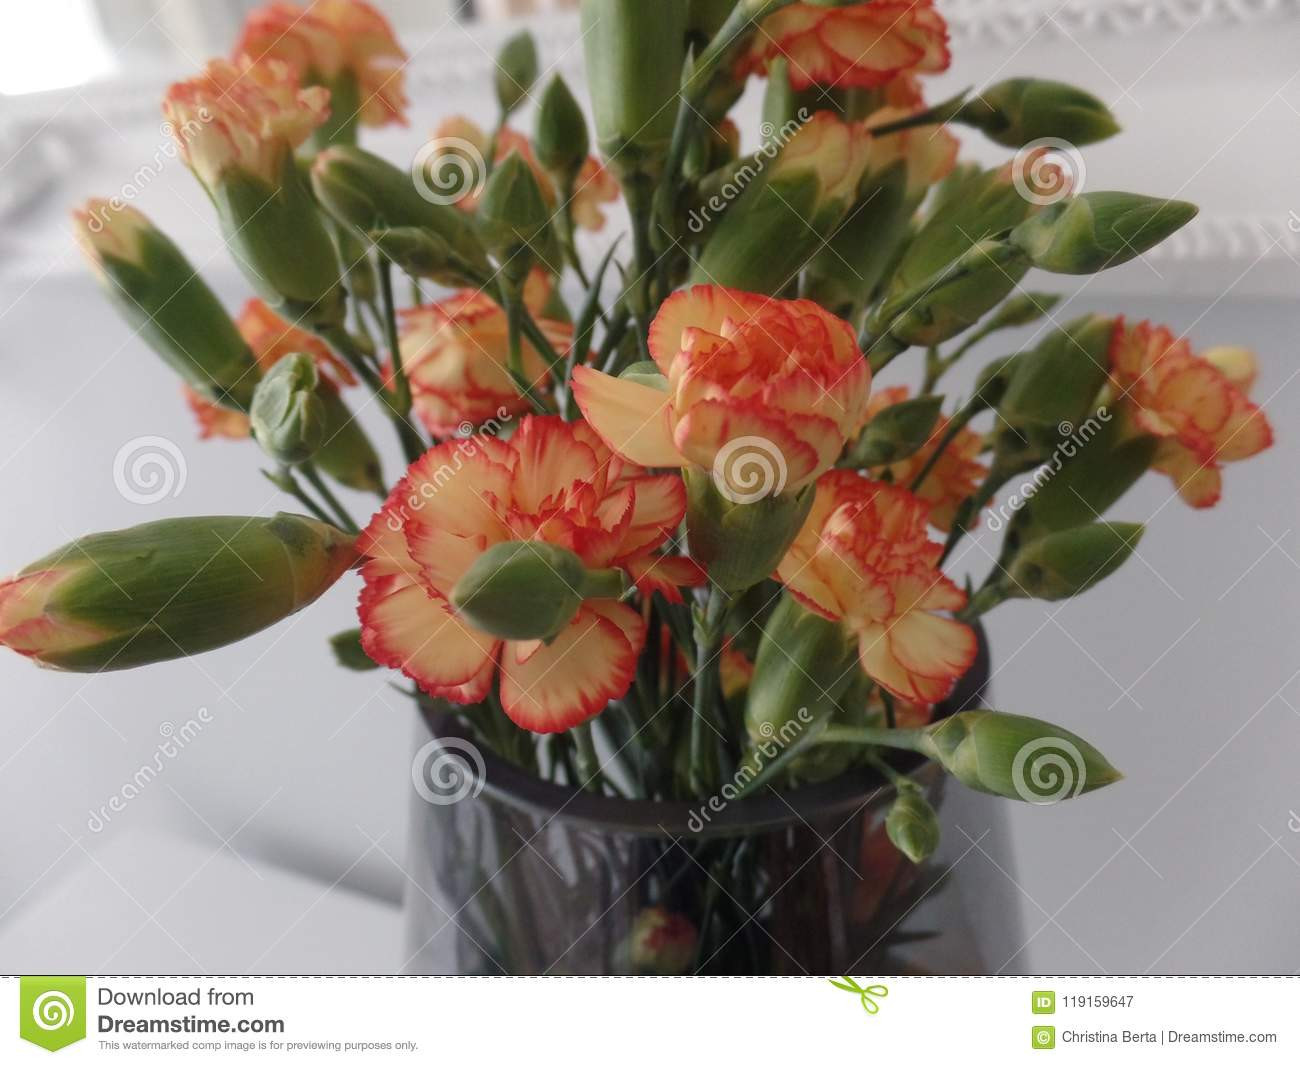 21 Recommended Flower Arrangements In Cylinder Vases 2024 free download flower arrangements in cylinder vases of bouquet of orange spray carnations stock image image of green for bouquet of orange spray carnations